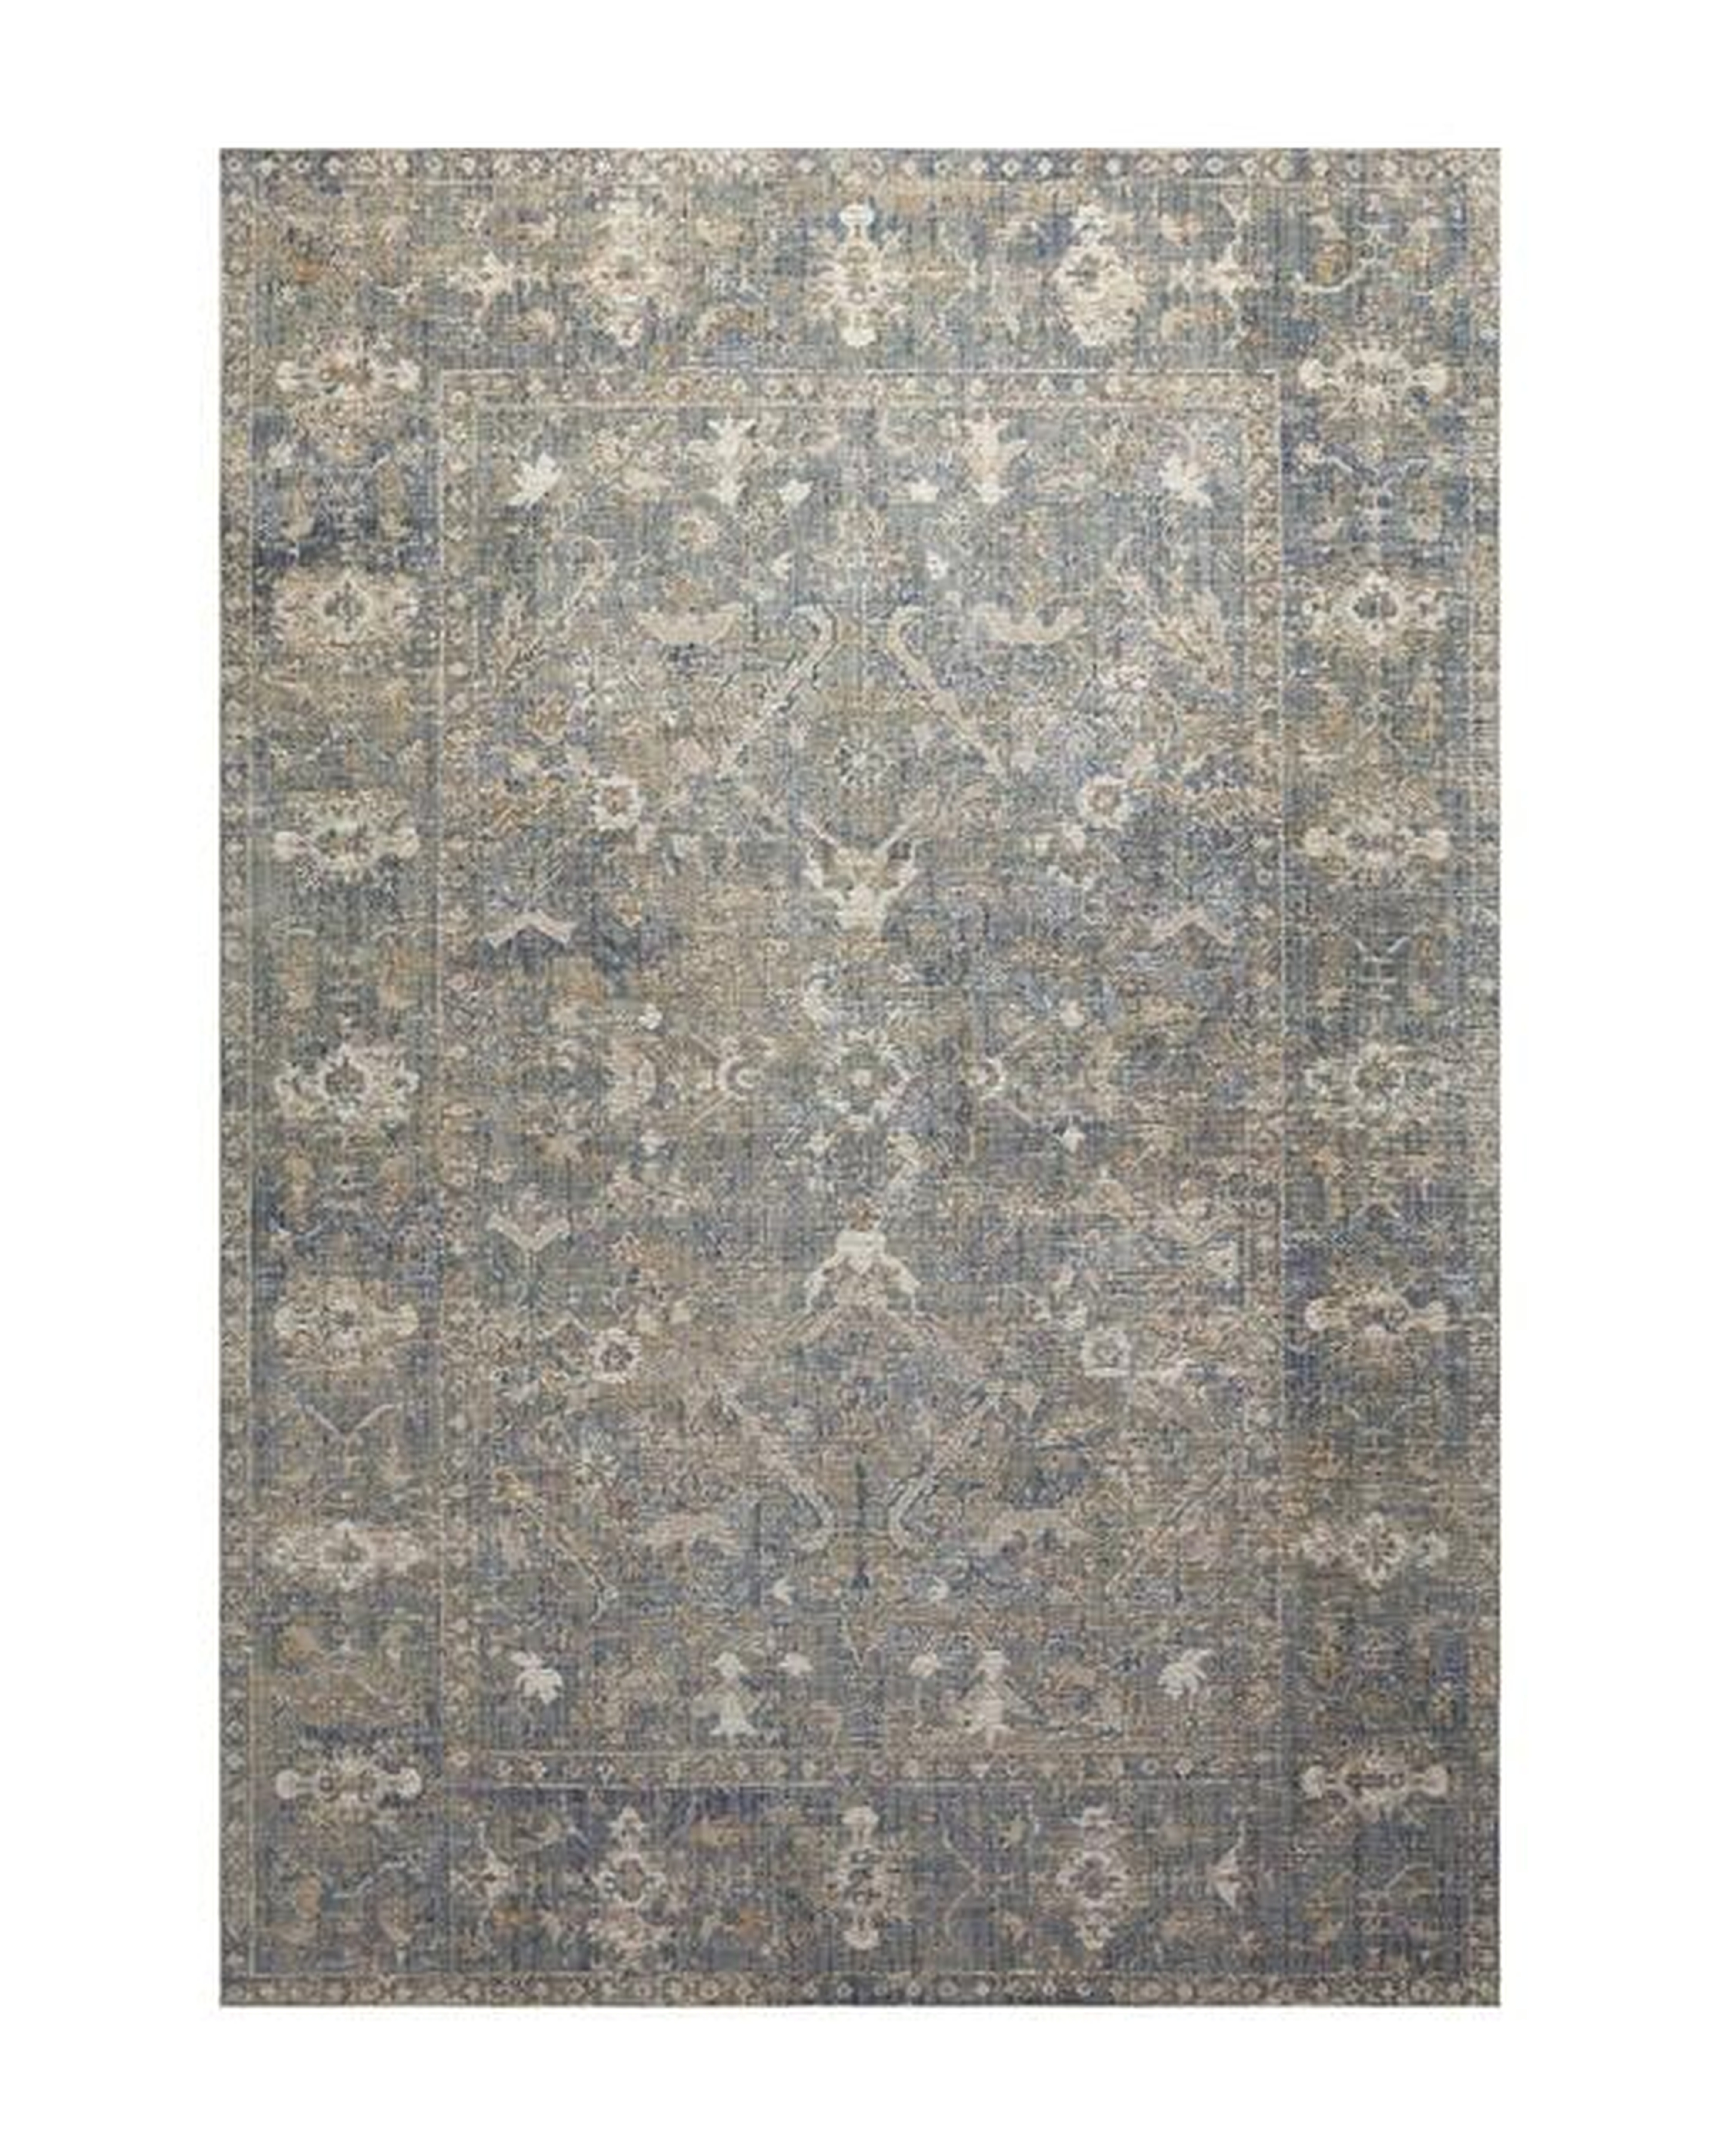 Rosemarie Collection No. 3 Rug, 7'10" x 10' - McGee & Co.